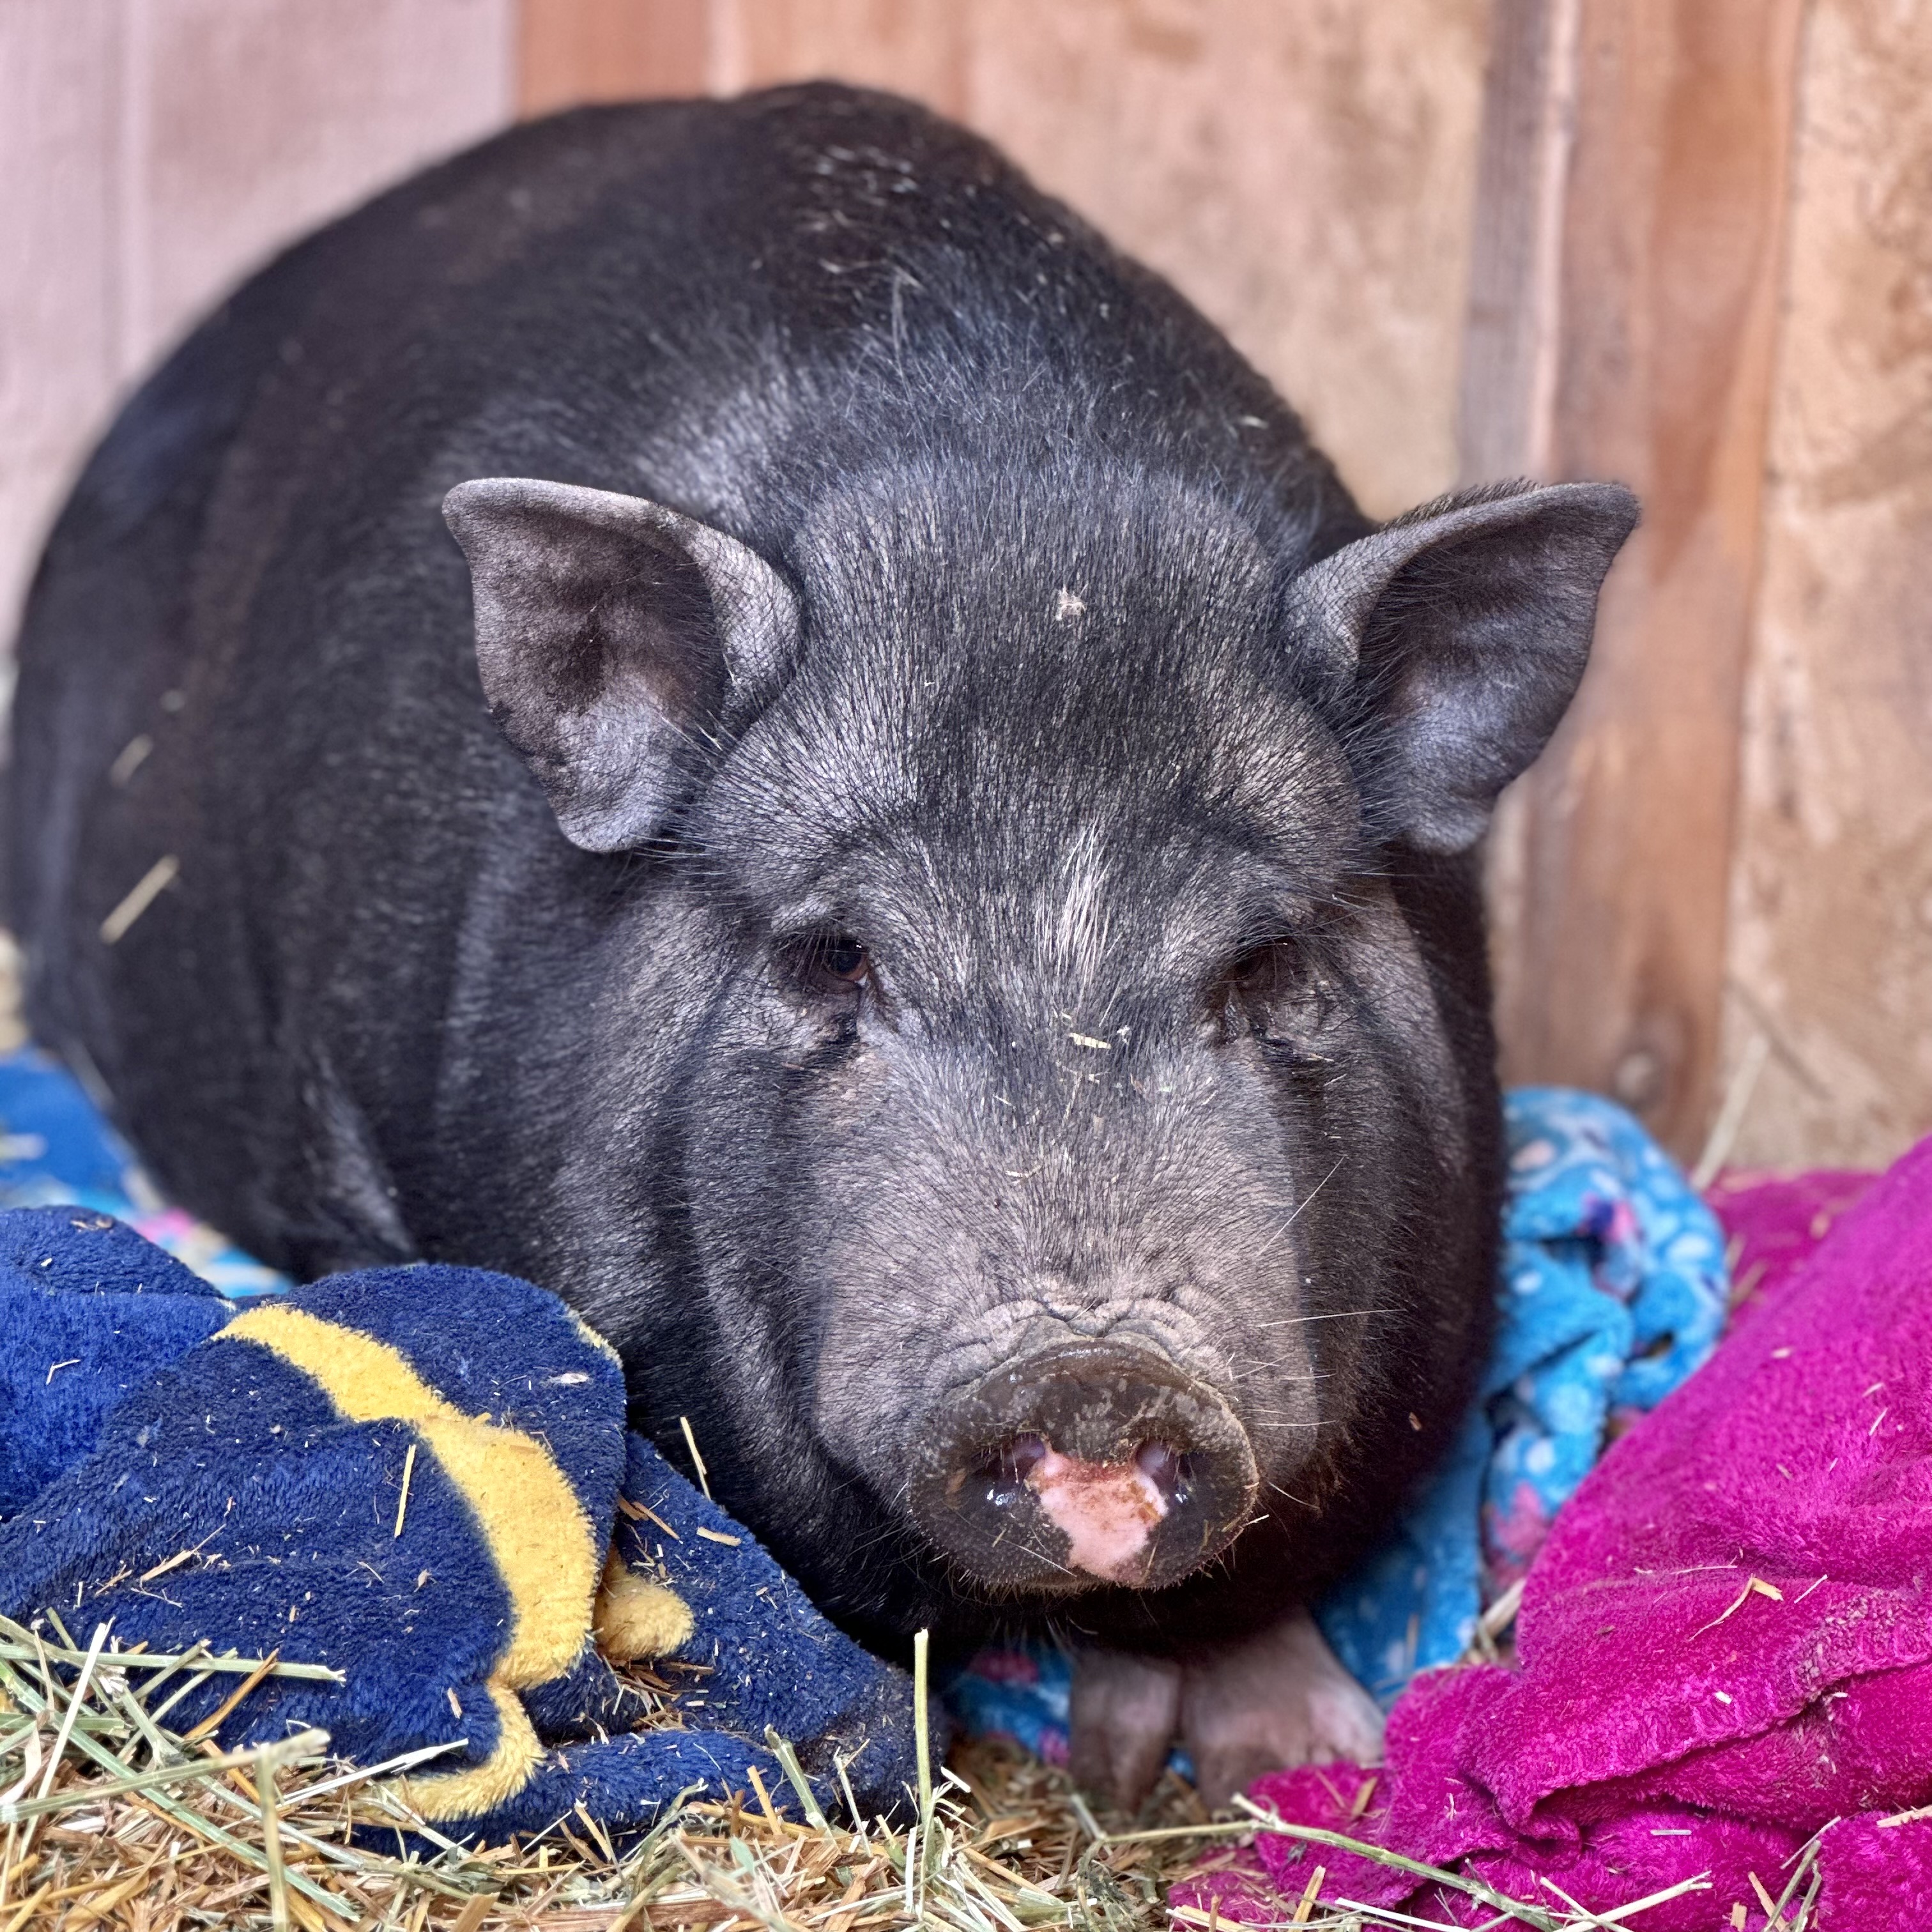 A pig sits contentedly on blankets and straw in a pen.